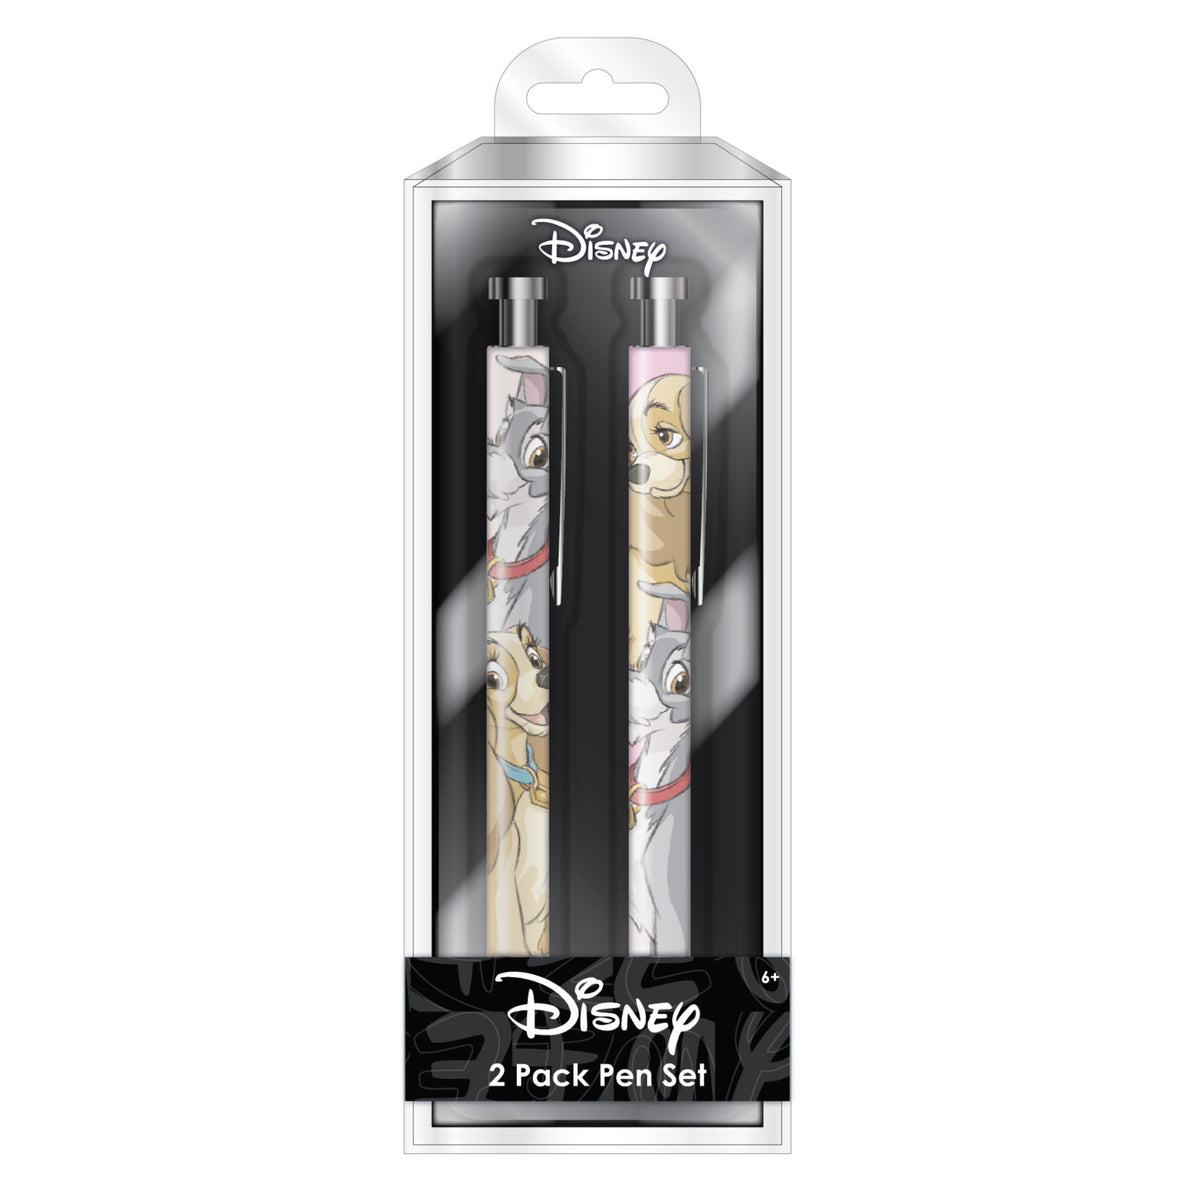 Lady and the Tramp 2 Pack Pen Set